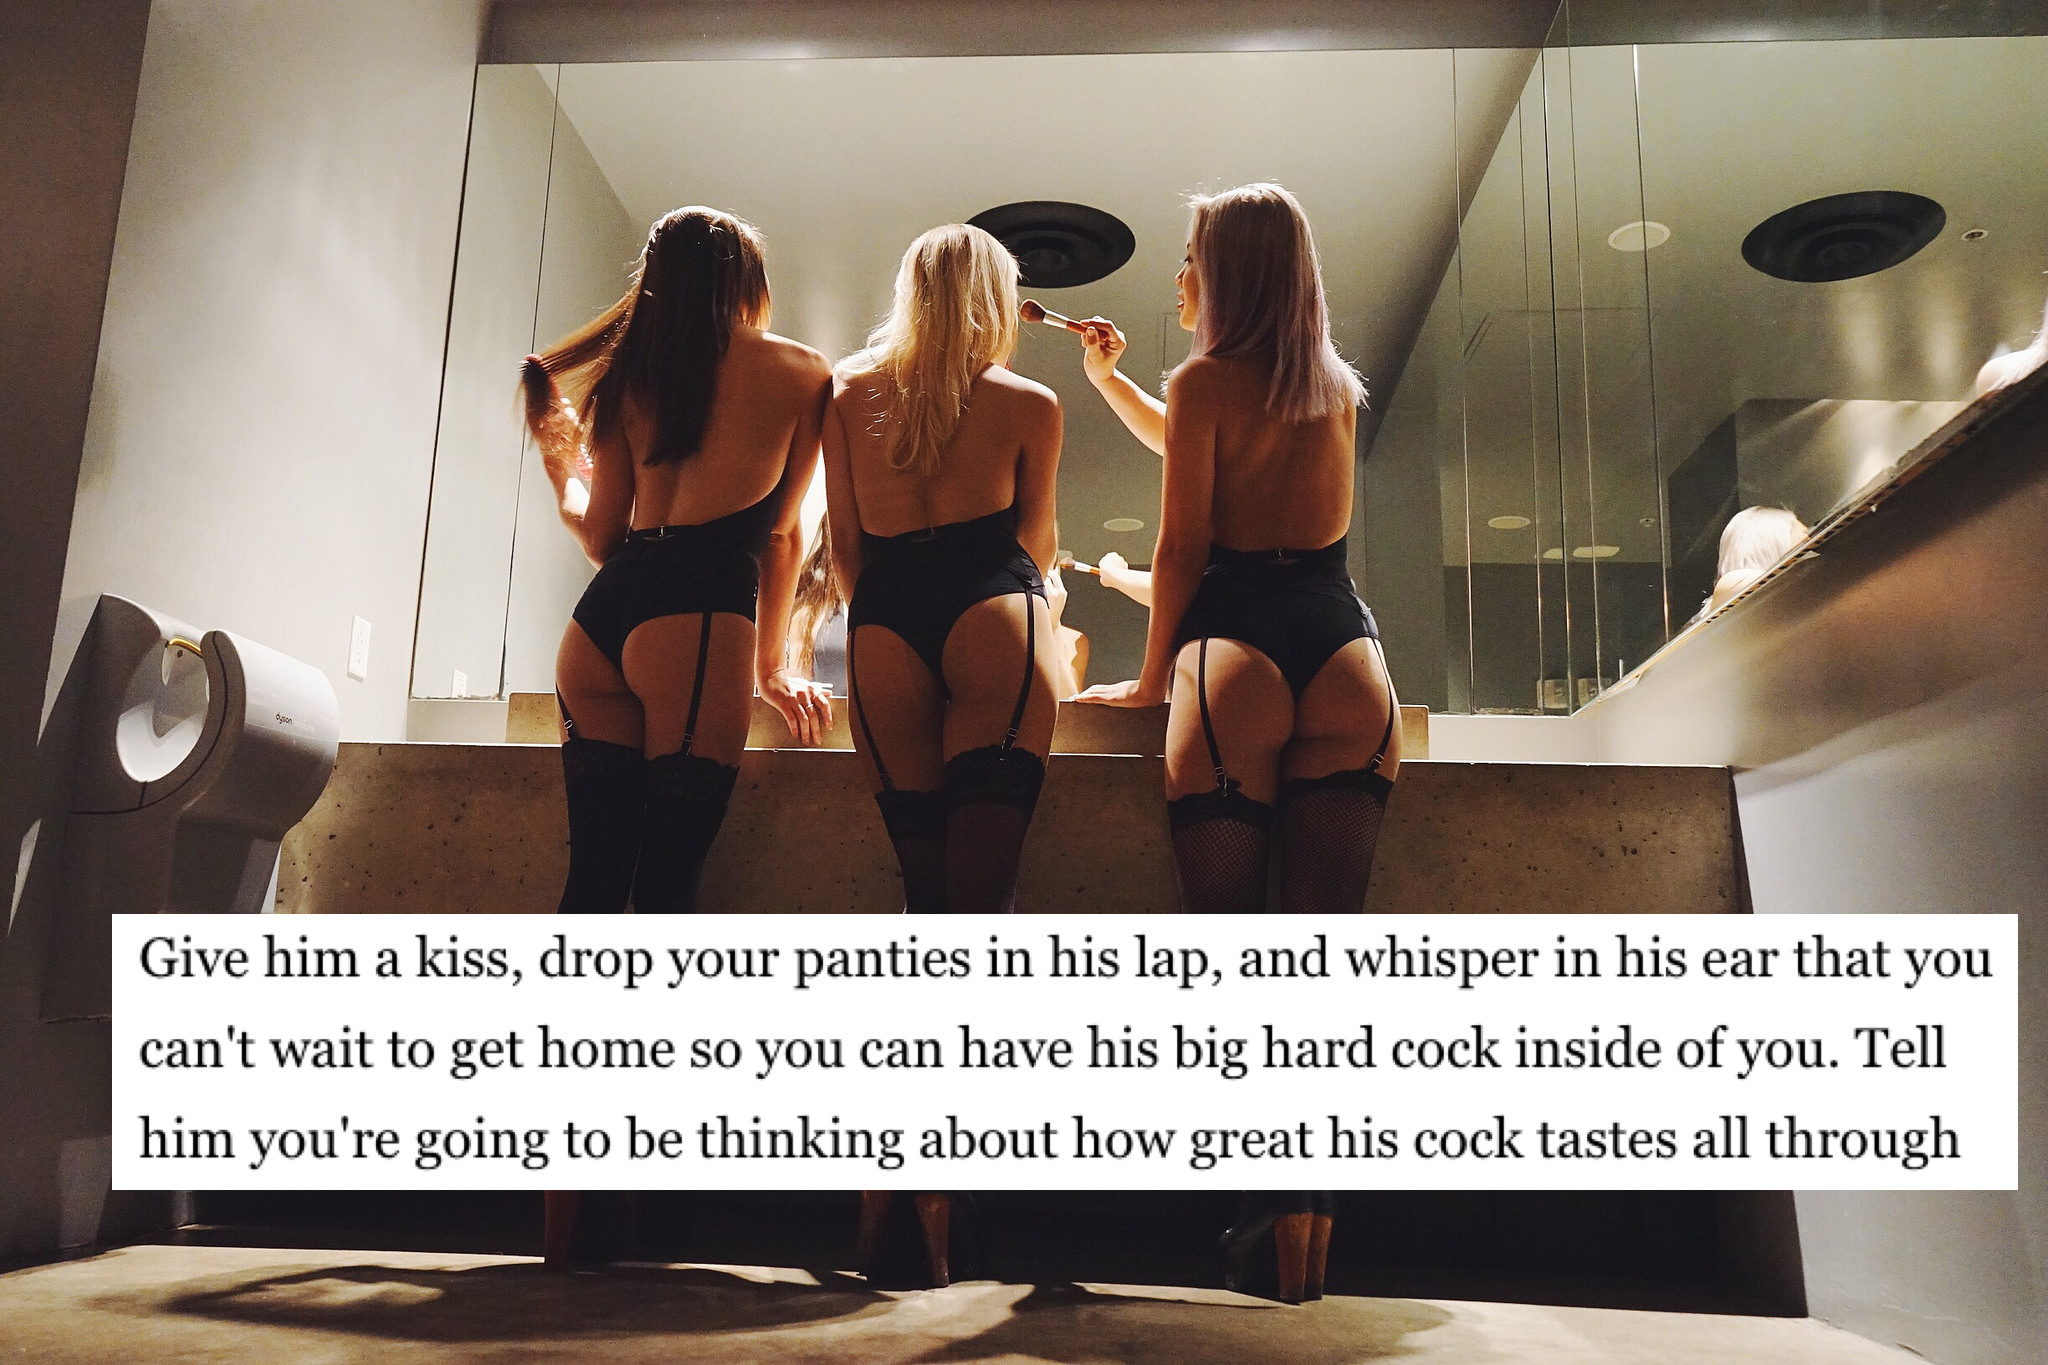 15 Guys Share What Super Slutty Things pic